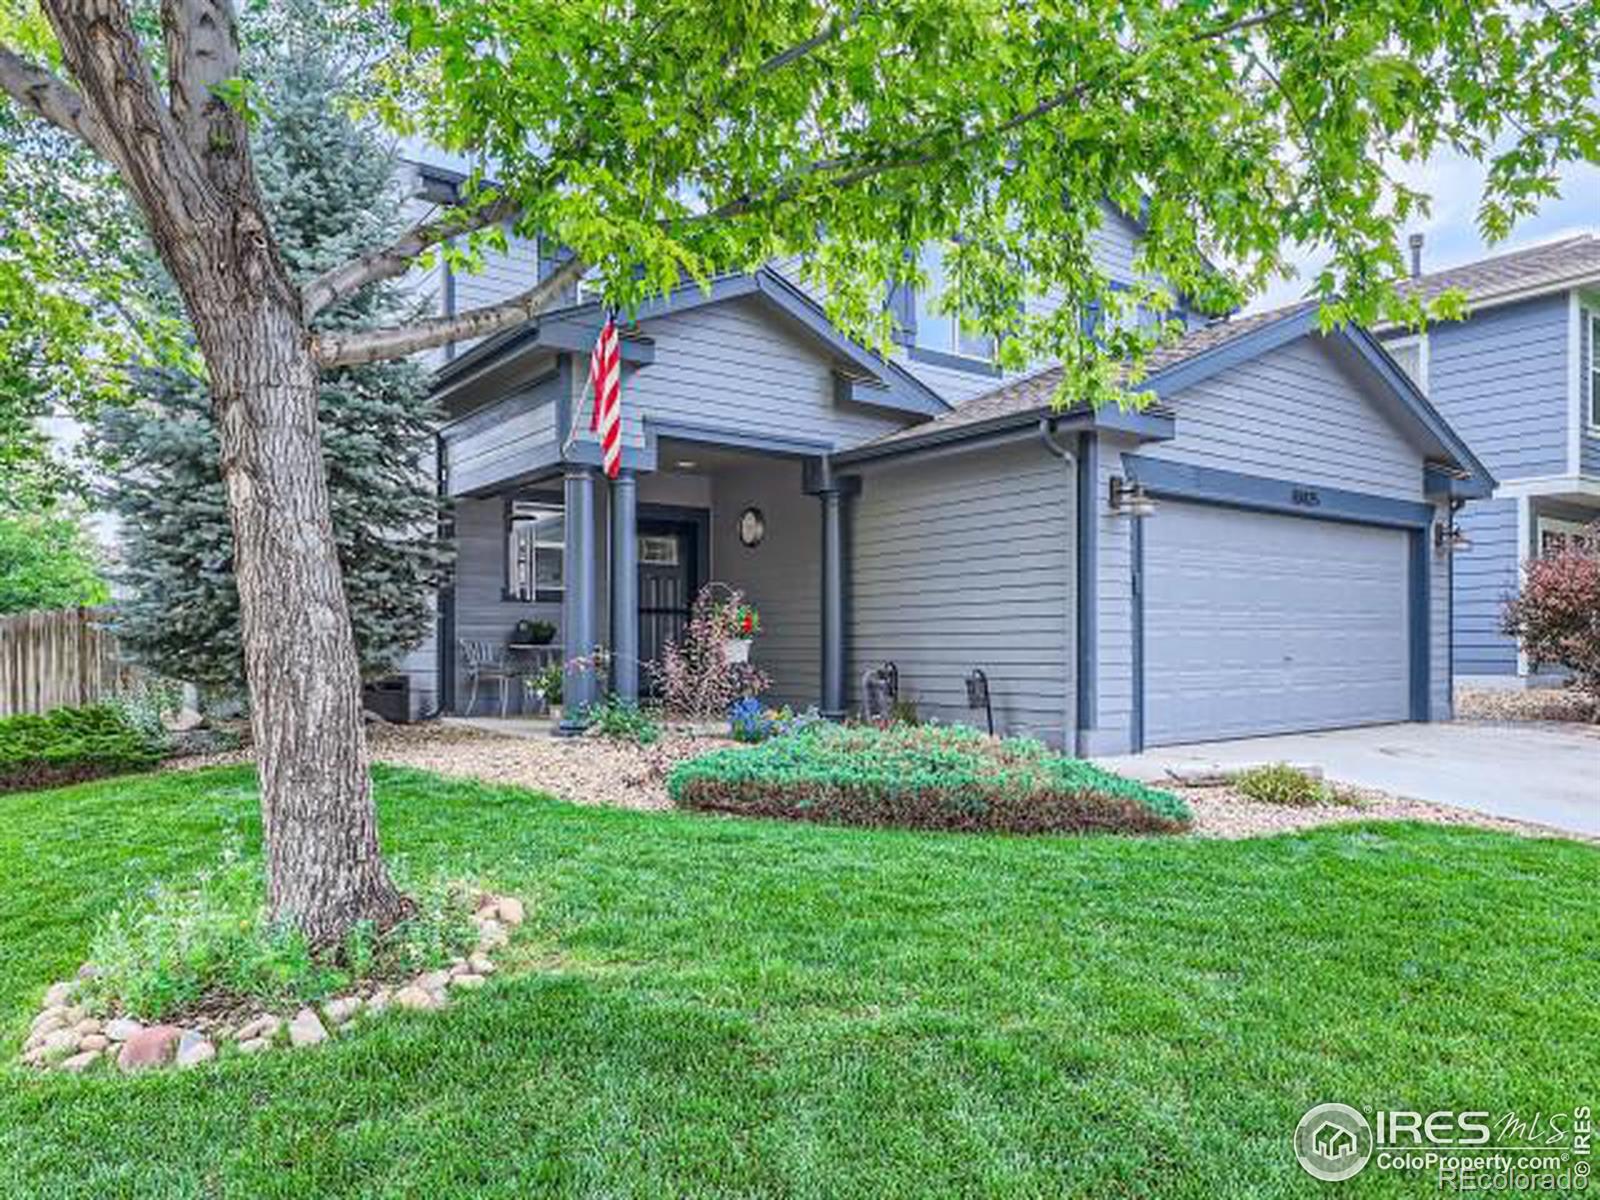 10425  lower highland road, Longmont sold home. Closed on 2024-04-15 for $495,000.